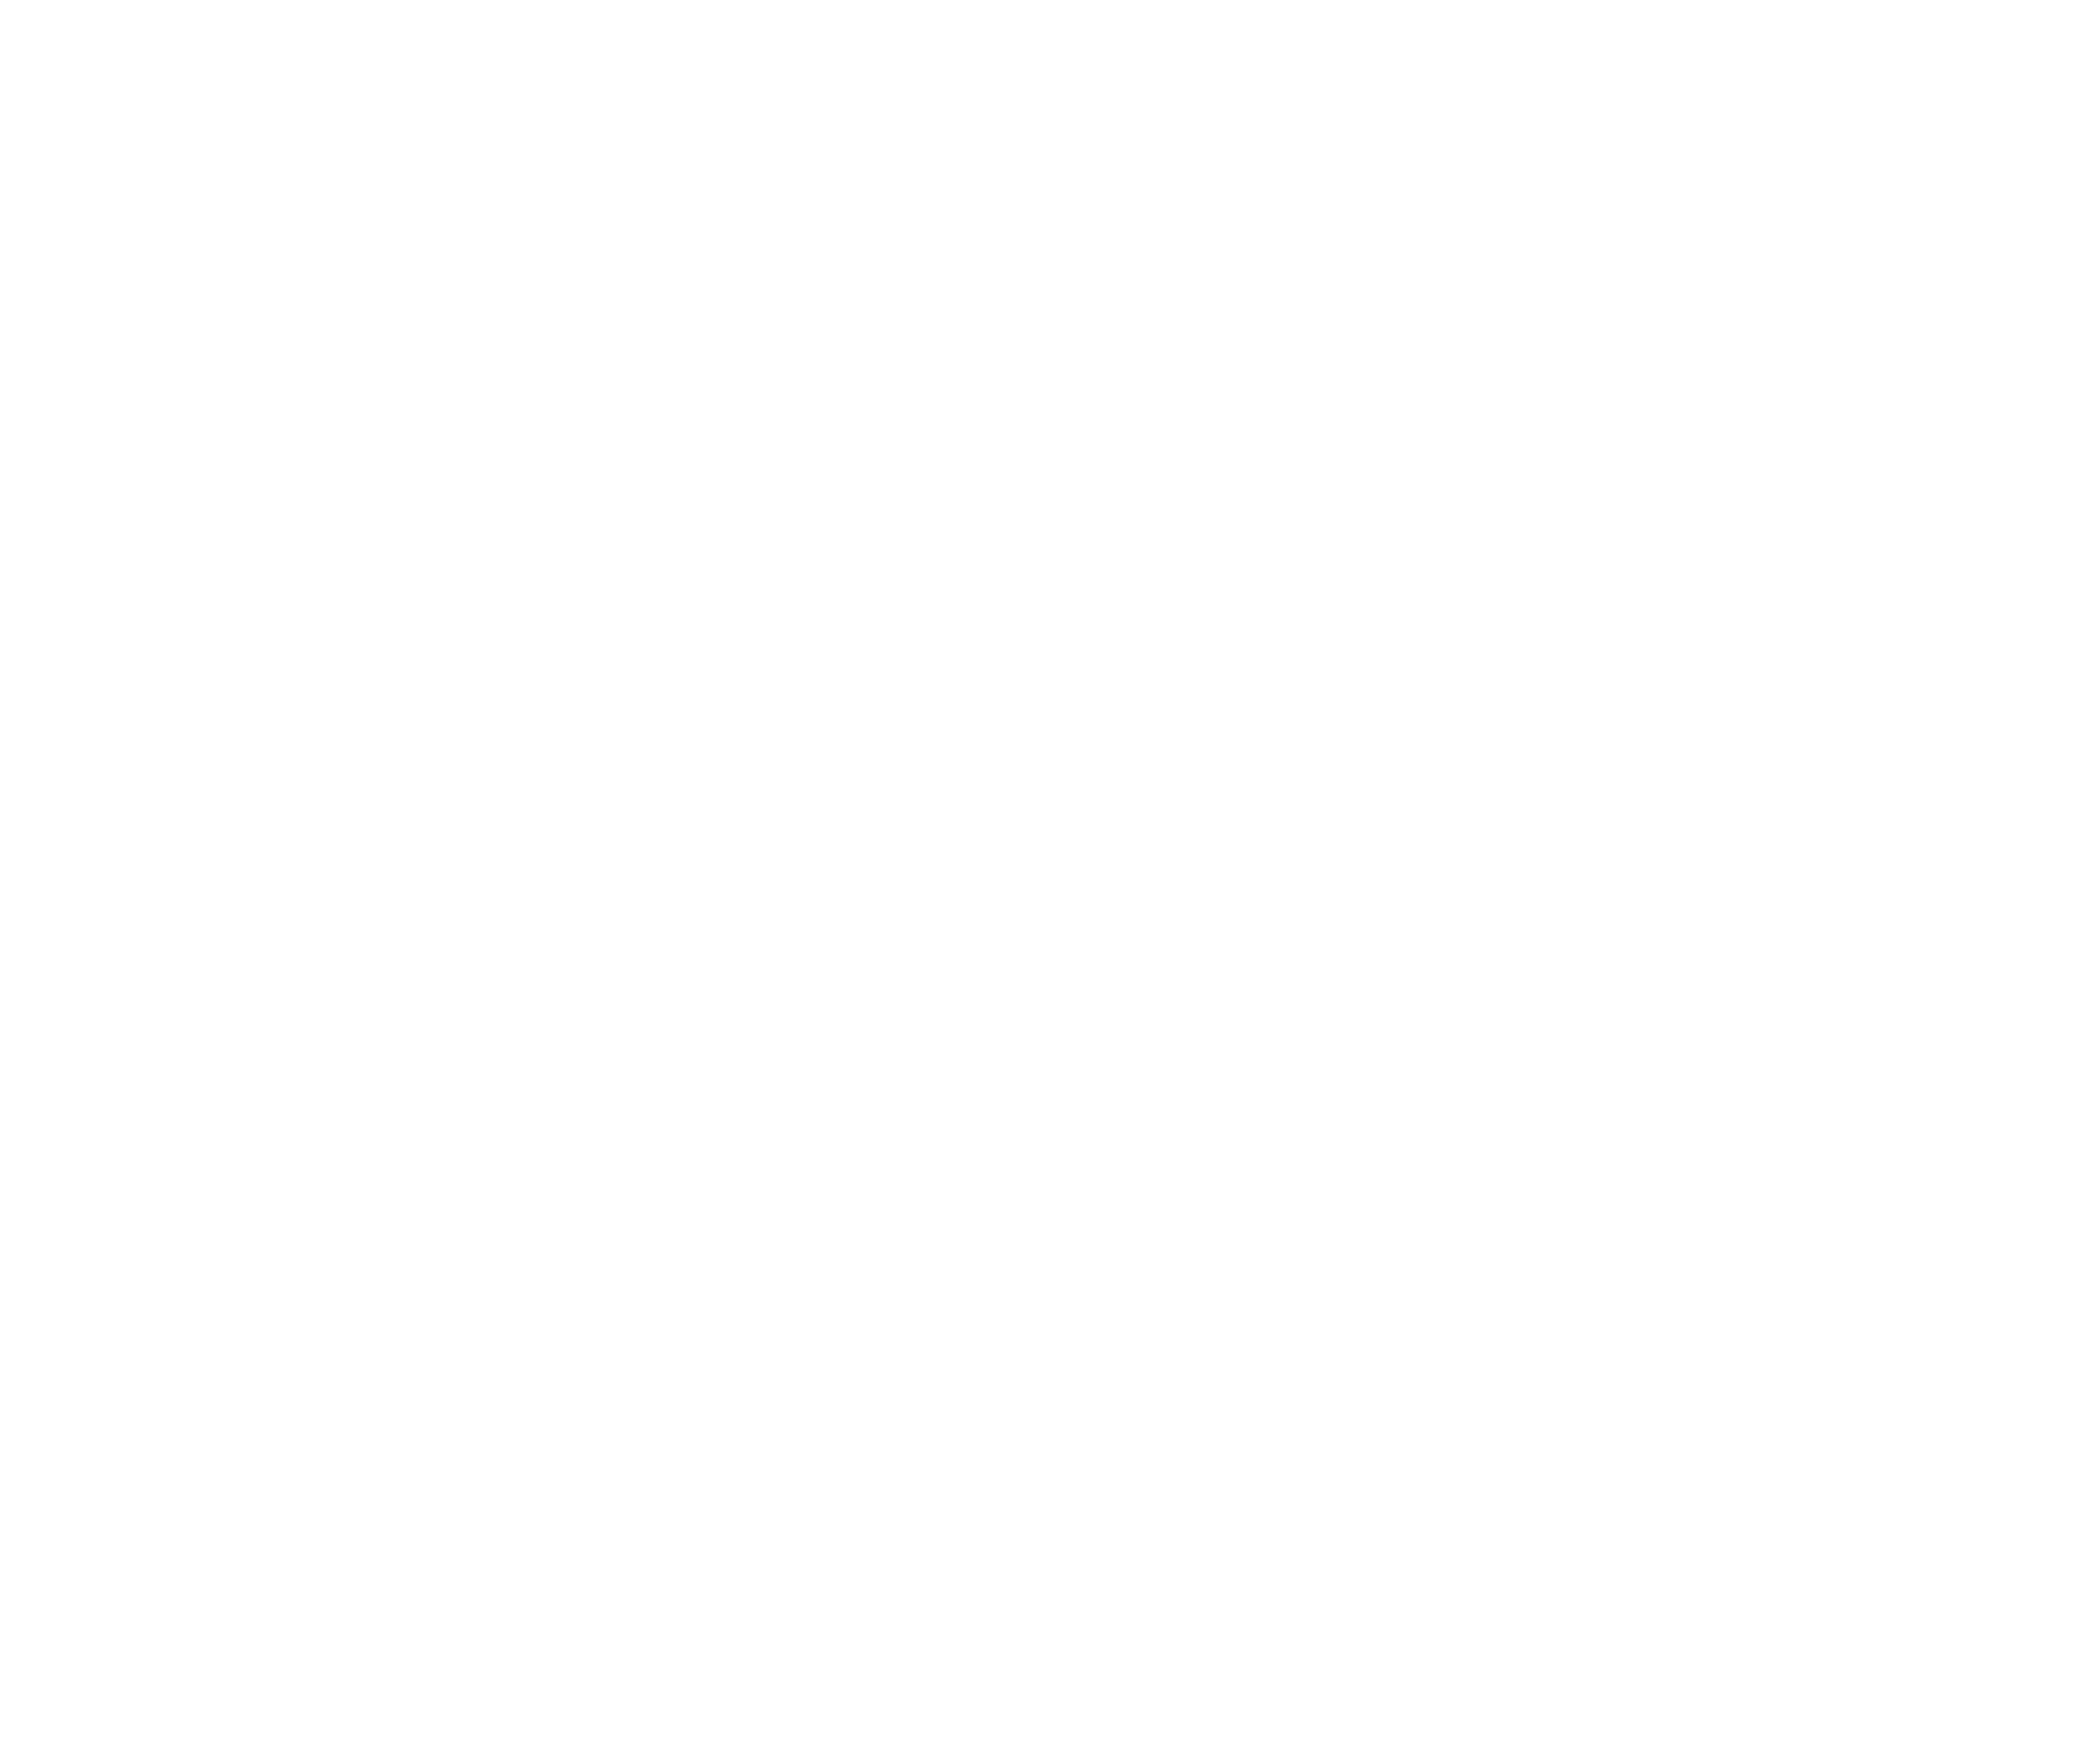 MANIS SWEETS